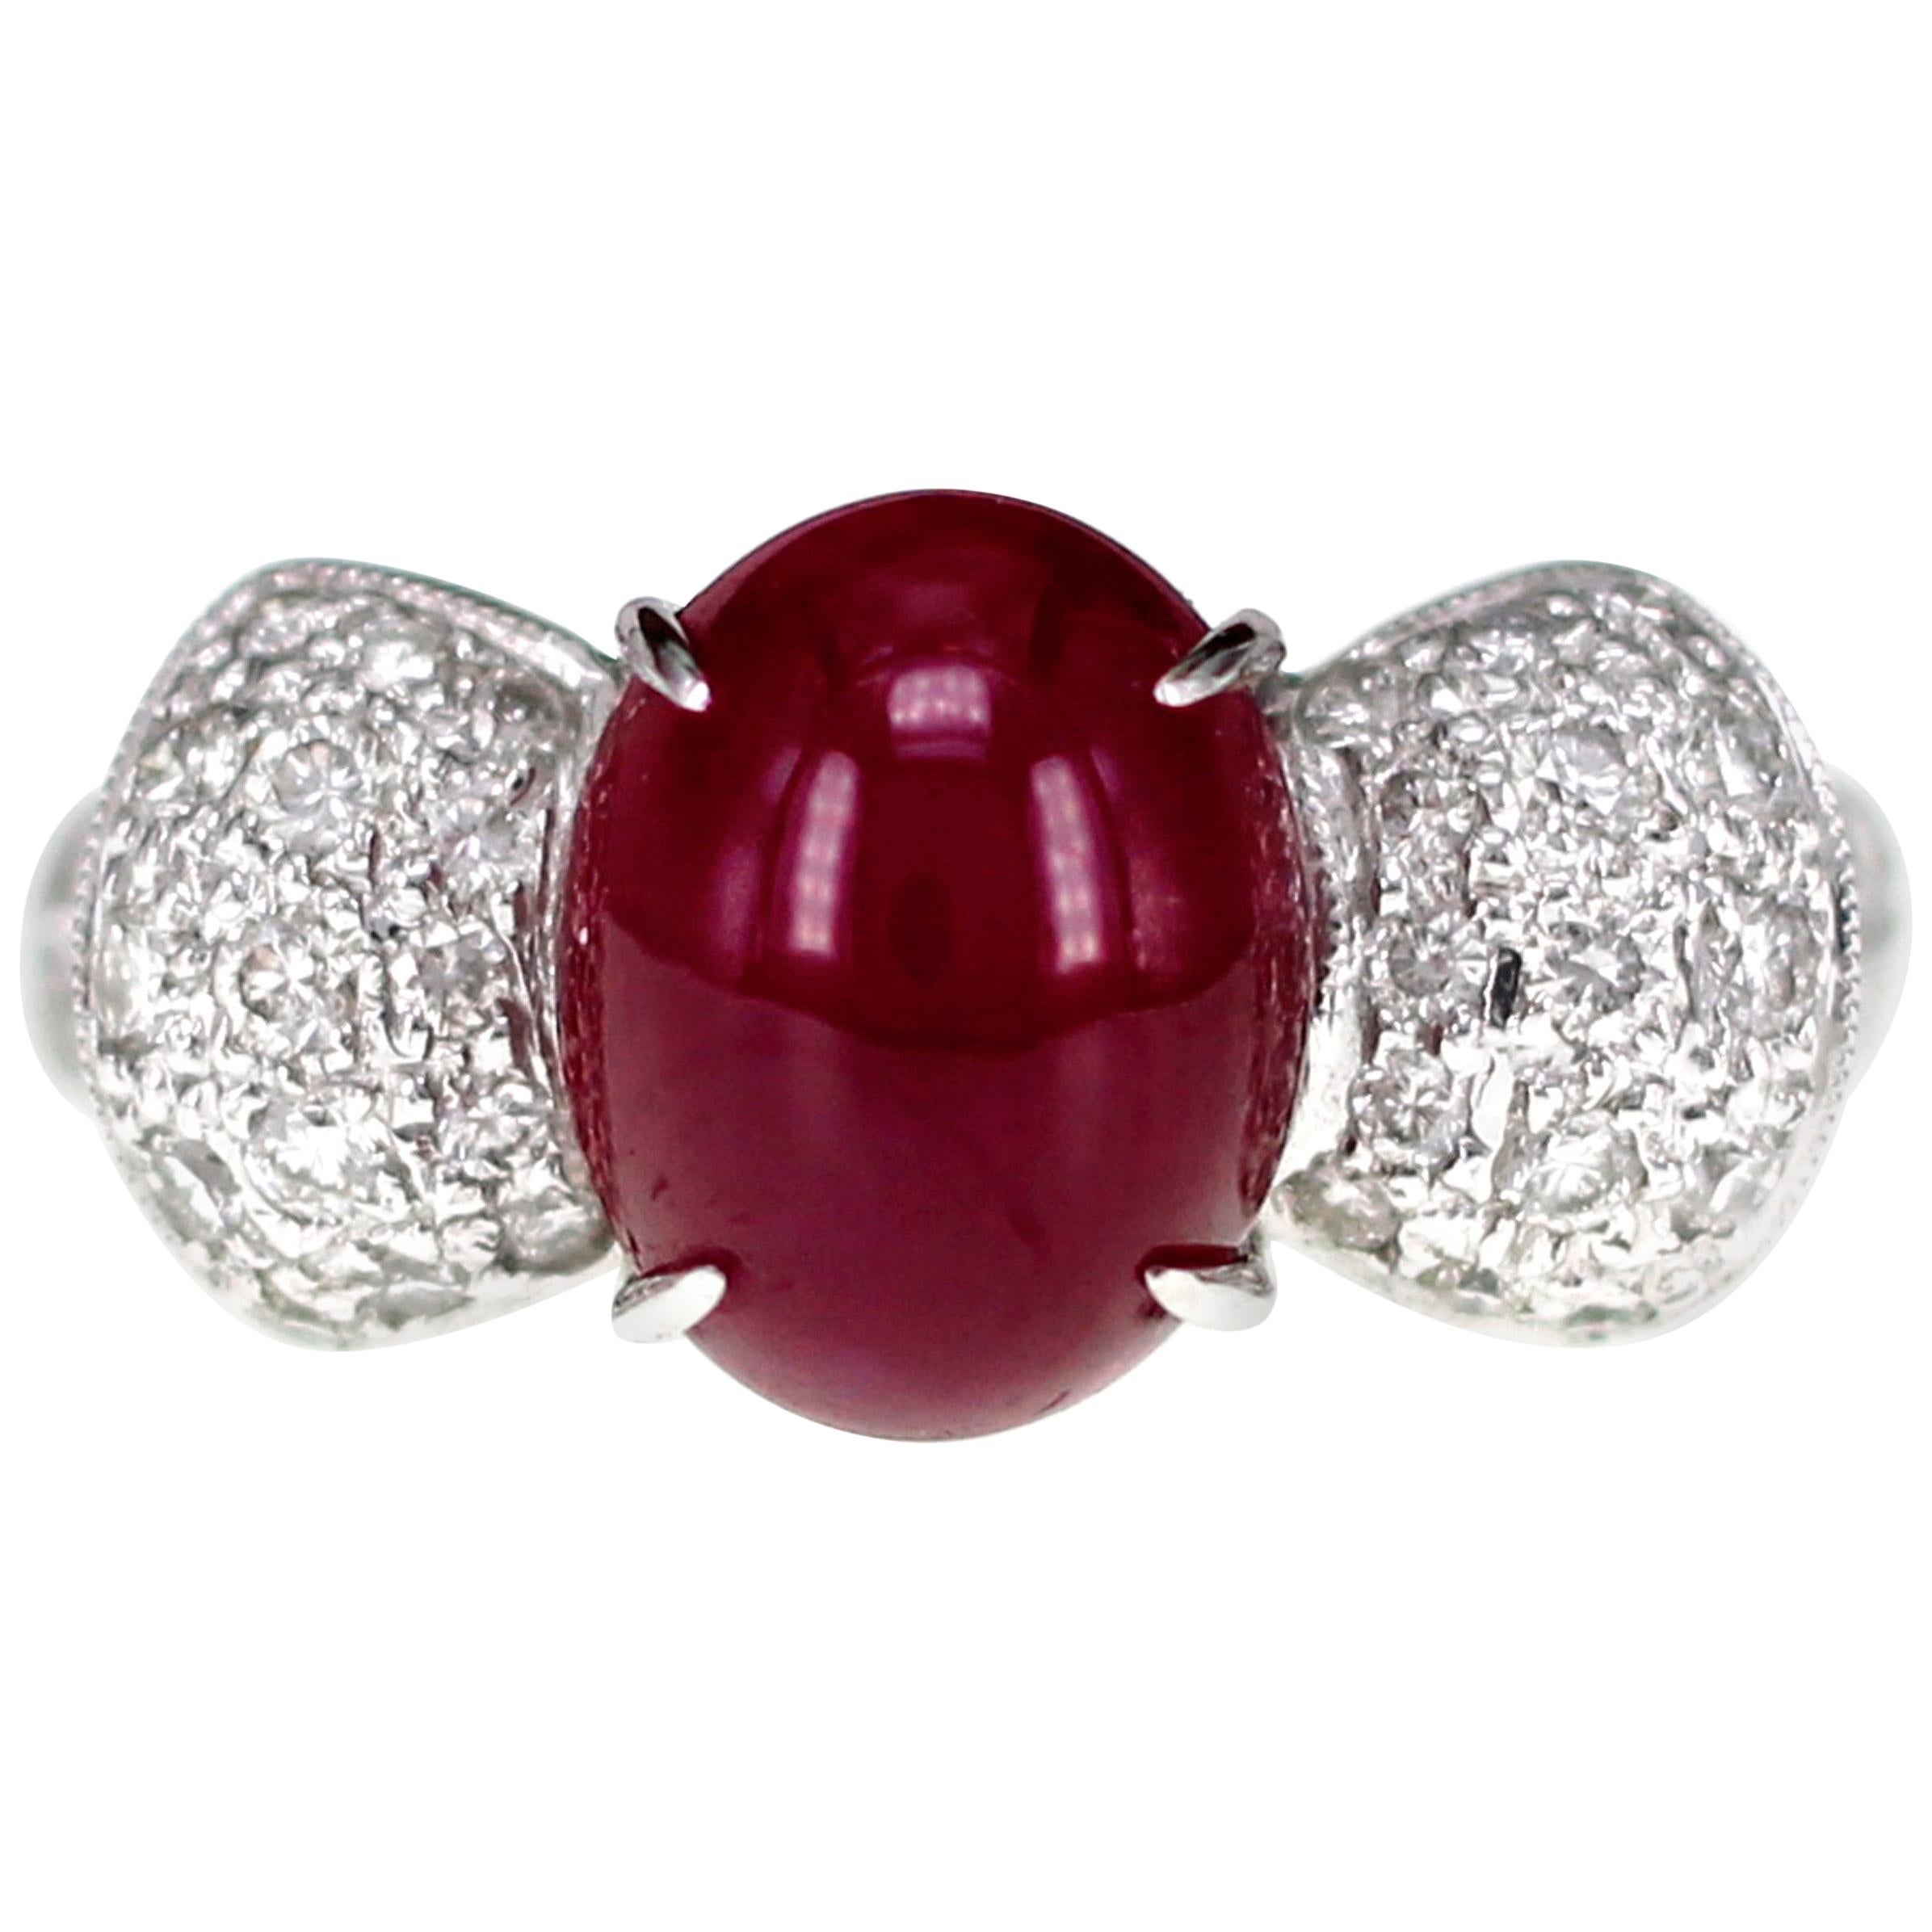 4.79 Carat Ruby Solitare Ring For Sale